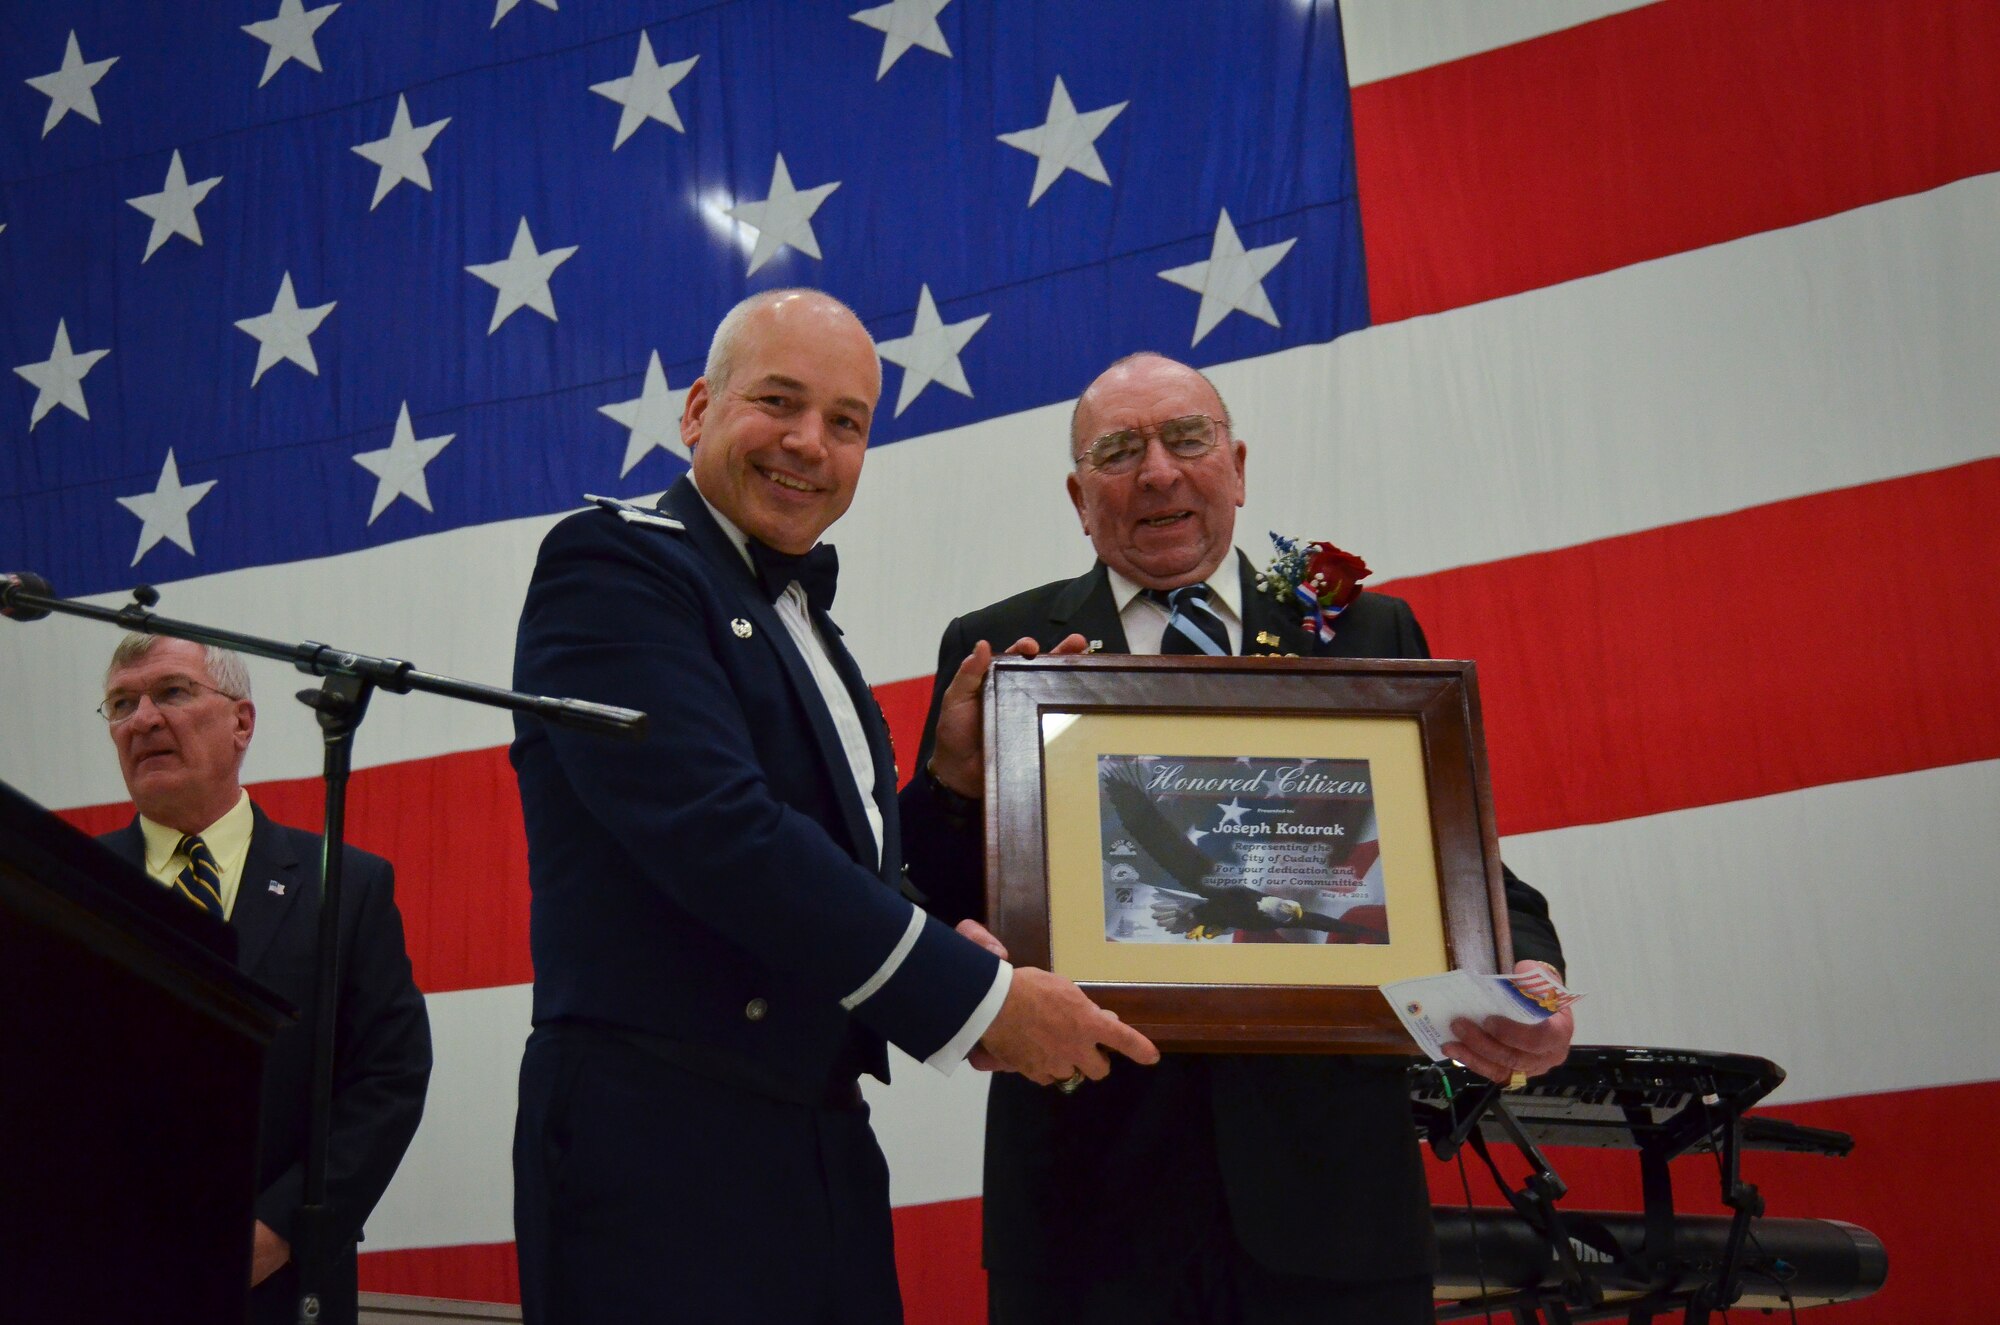 Col. Daniel Yenchesky, the 128th Air Refueling Wing commander, presents the Honored Citizen Award to Joseph Kotarak, Jr. at the 35th annual Civic Dinner Dance in the aircraft hangar here May 14, 2015.  The Civic Dinner Dance is an event coordinated by the Milwaukee Armed Forces Committee for Wisconsin military members, elected state and local officials, and citizens of the local Milwaukee area to celebrate community relations during Armed Forces Week.  (U.S. Air National Guard photo by Tech. Sgt. Jenna Lenski/Released)